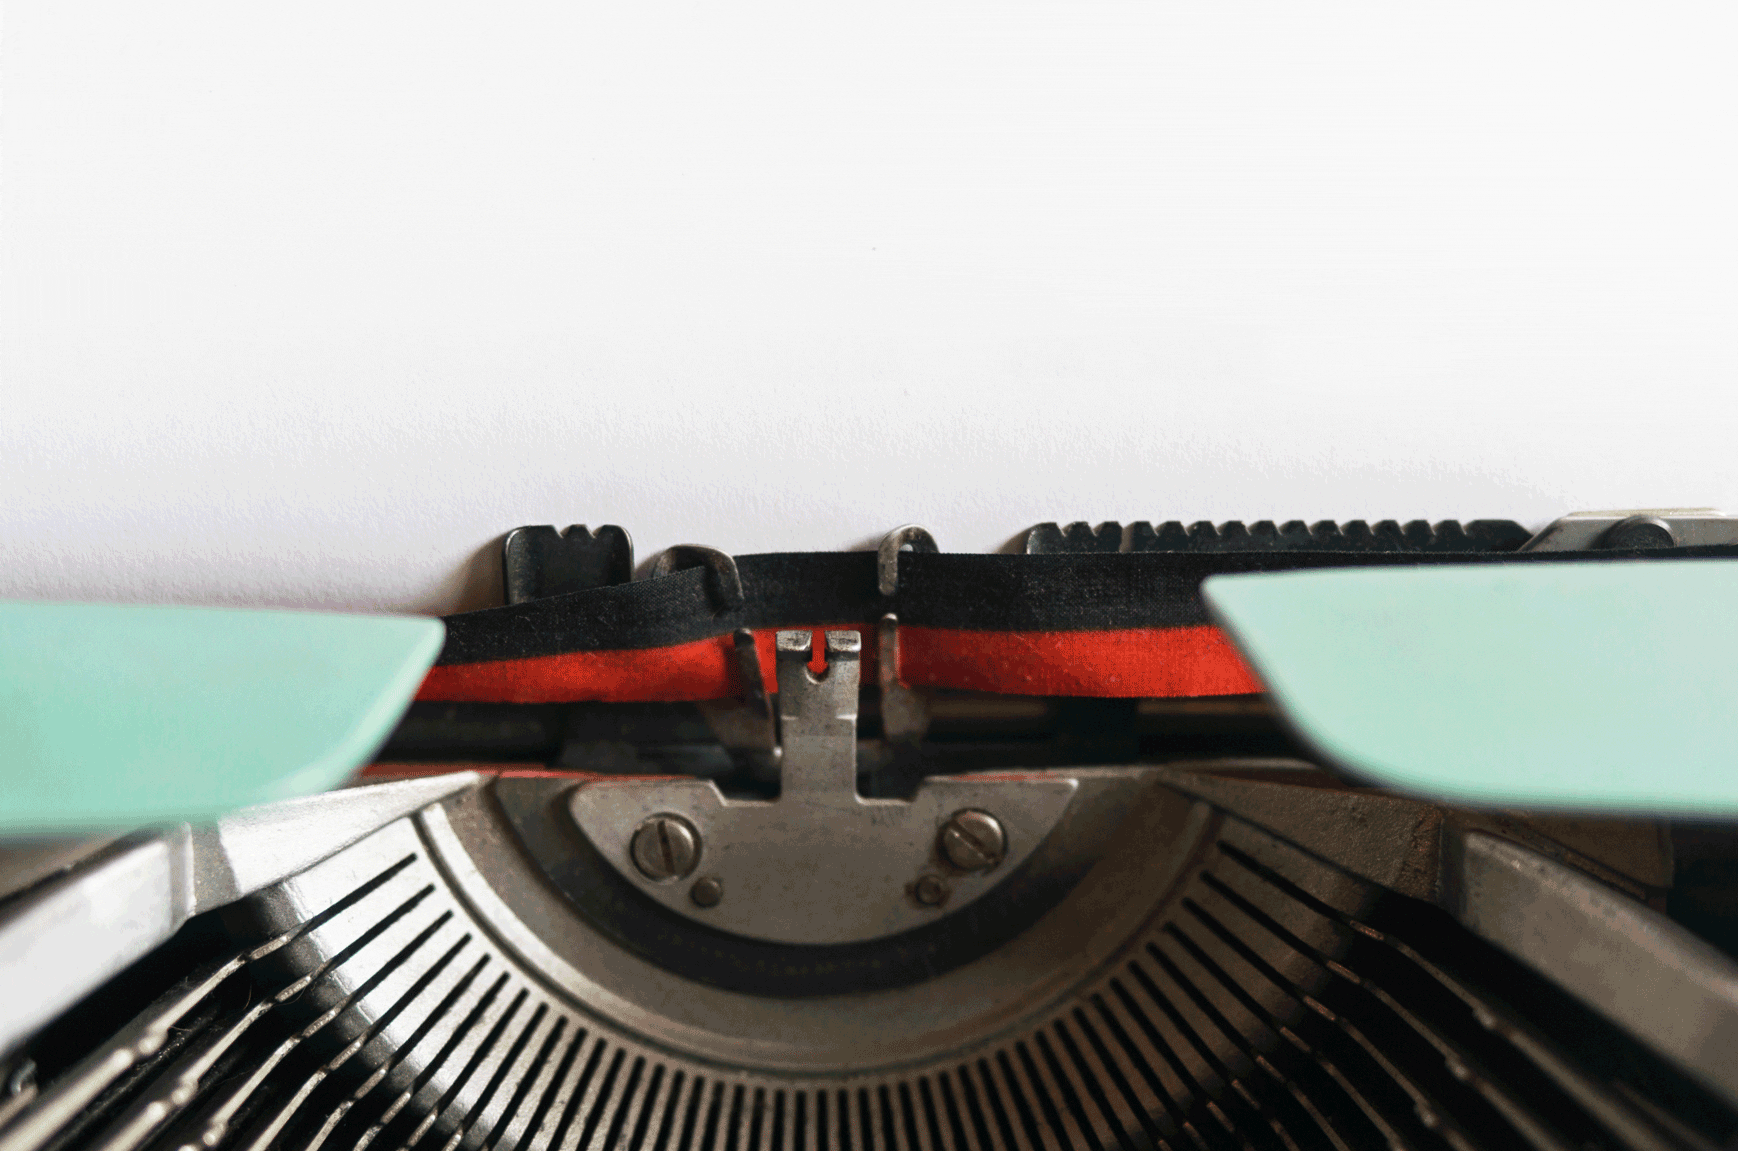 The word "No" appears on a piece of paper in a typewriter in this gif.